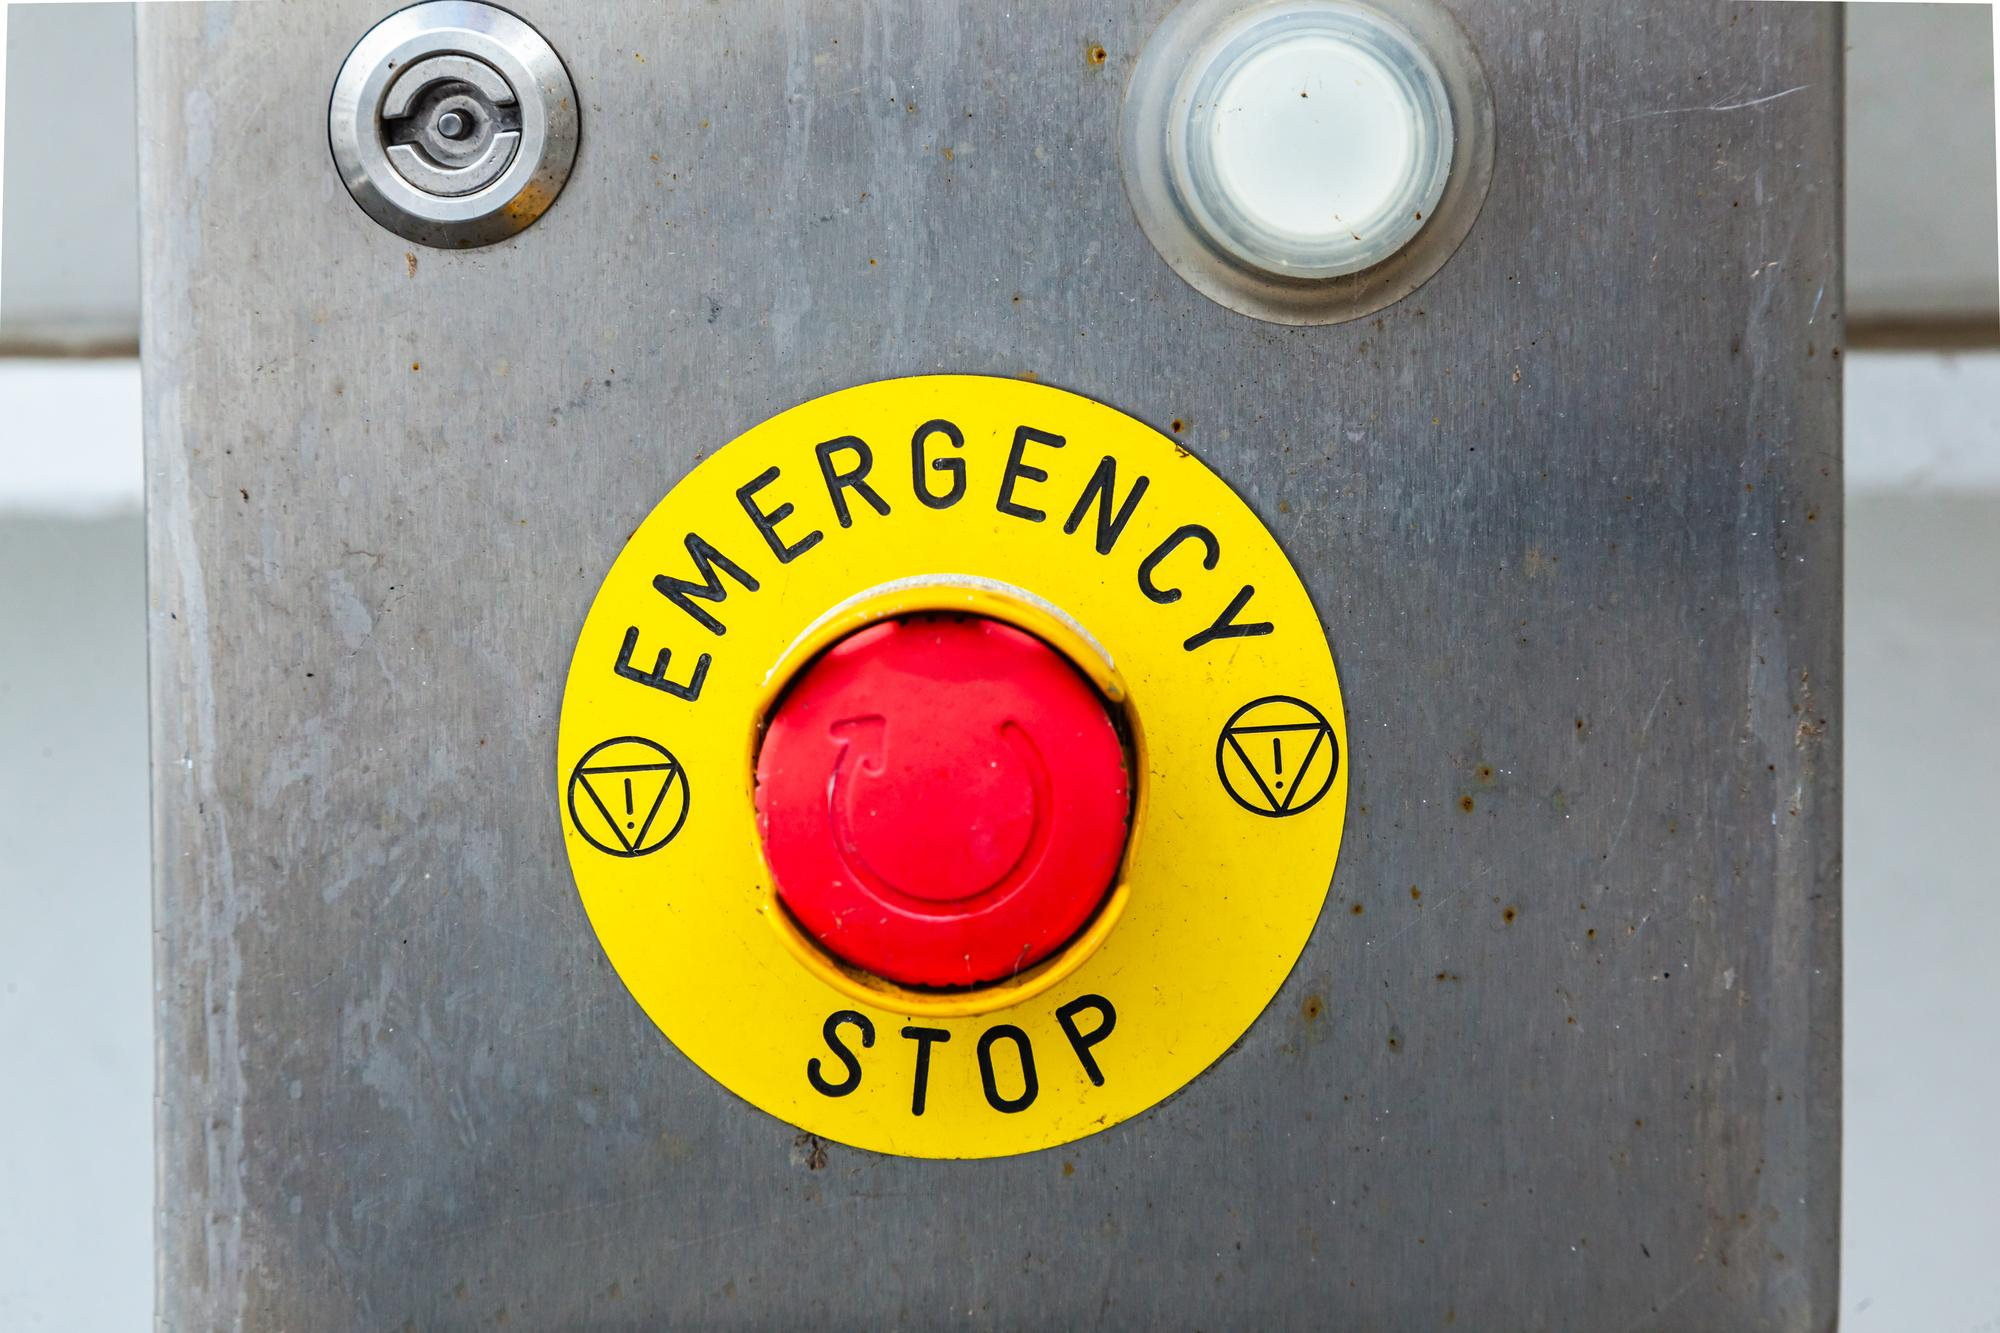 electric-box-with-buttons-ship-control-with-emergency-stop-button